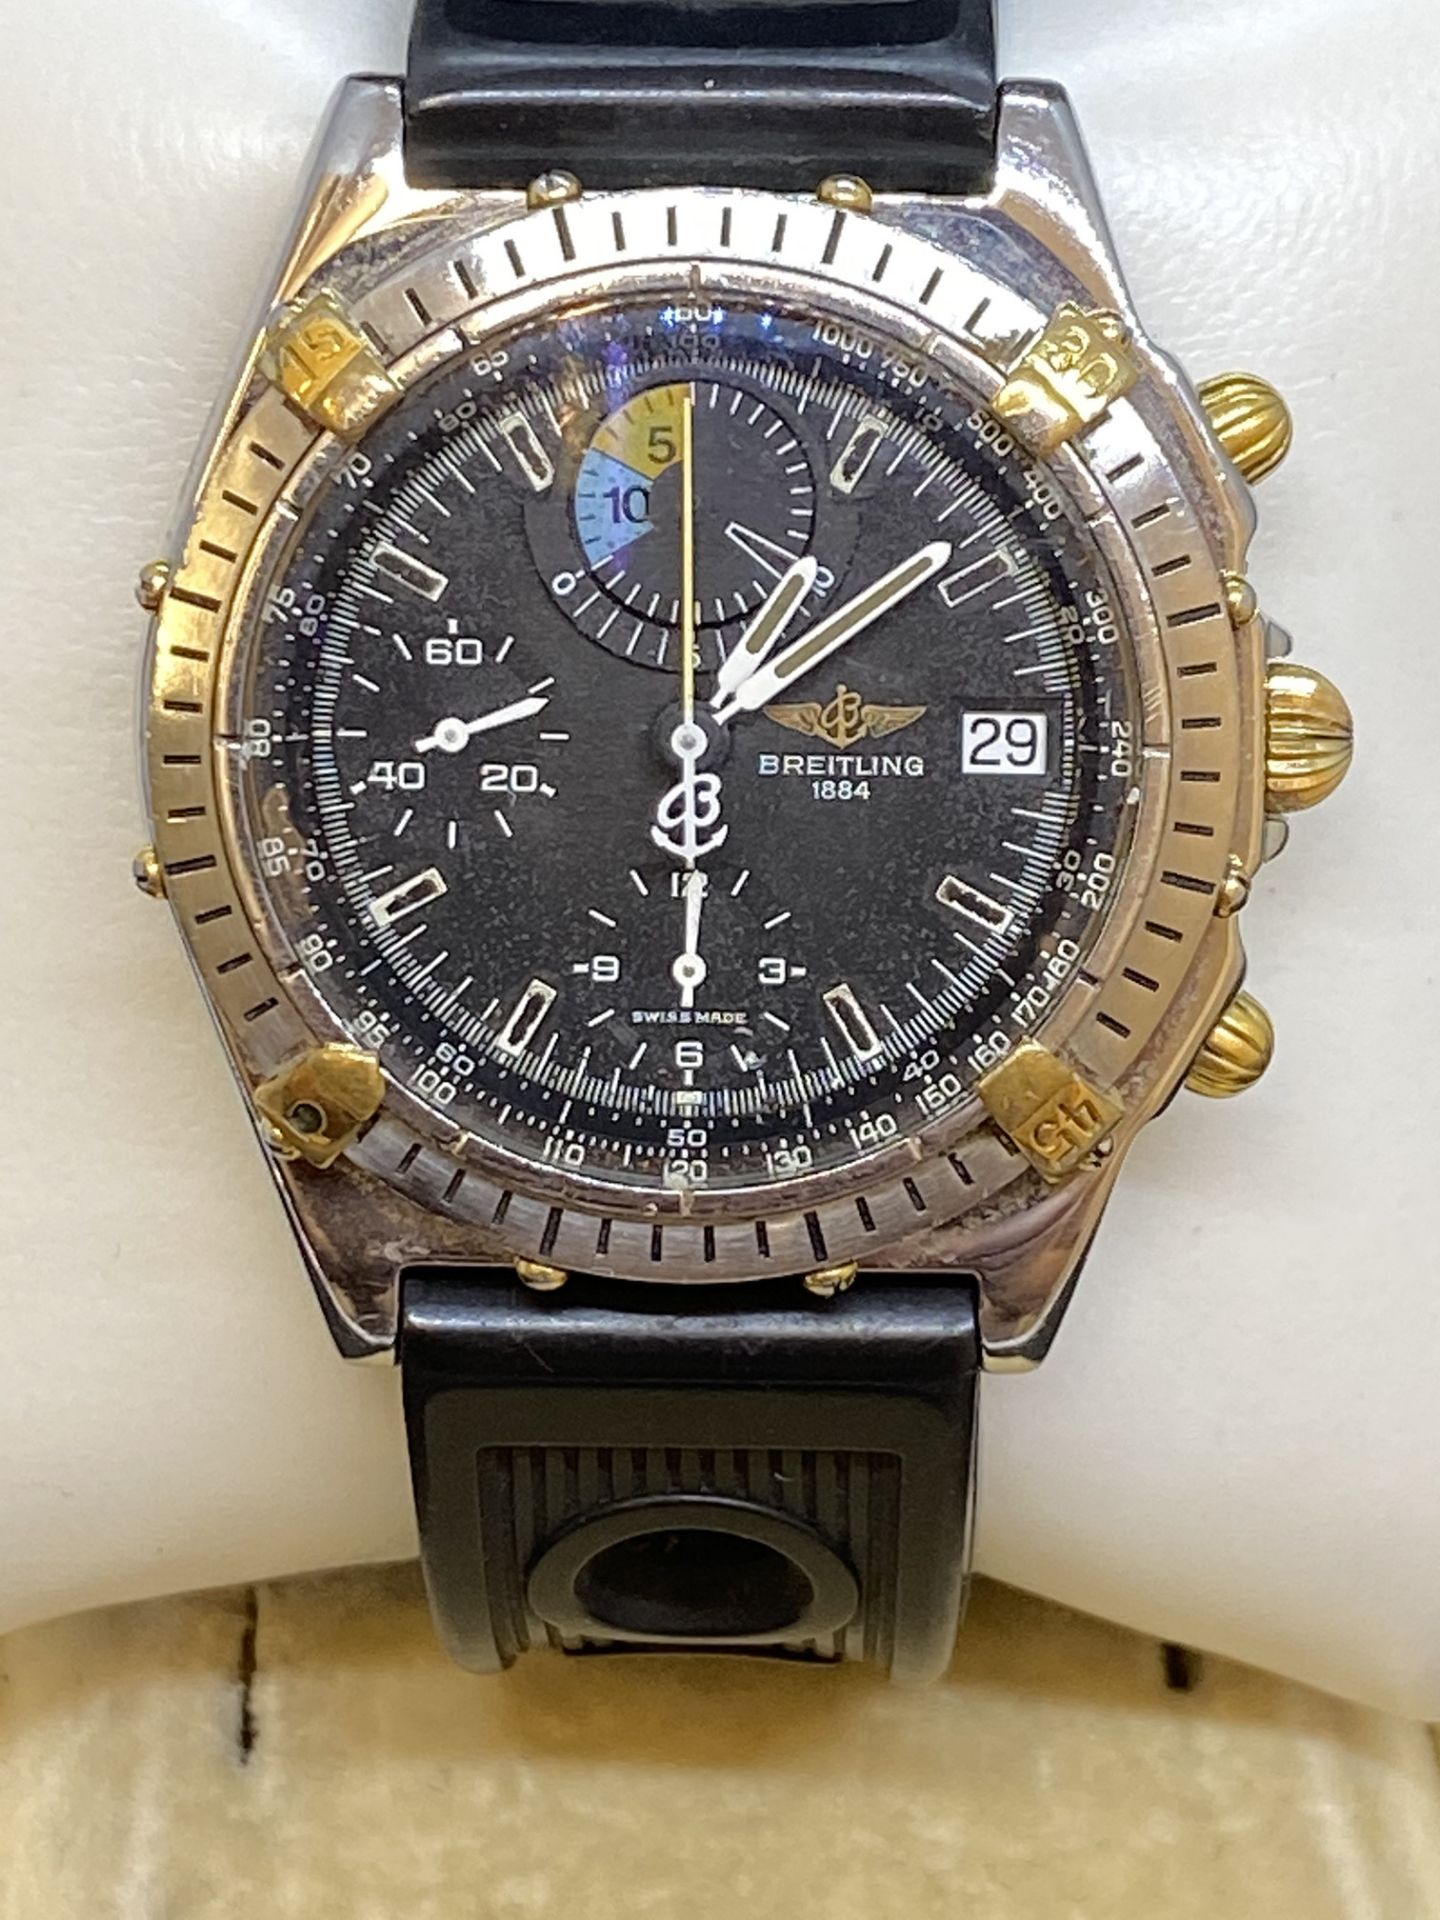 BREITLING STEEL & GOLD GENTS WATCH - Image 2 of 14